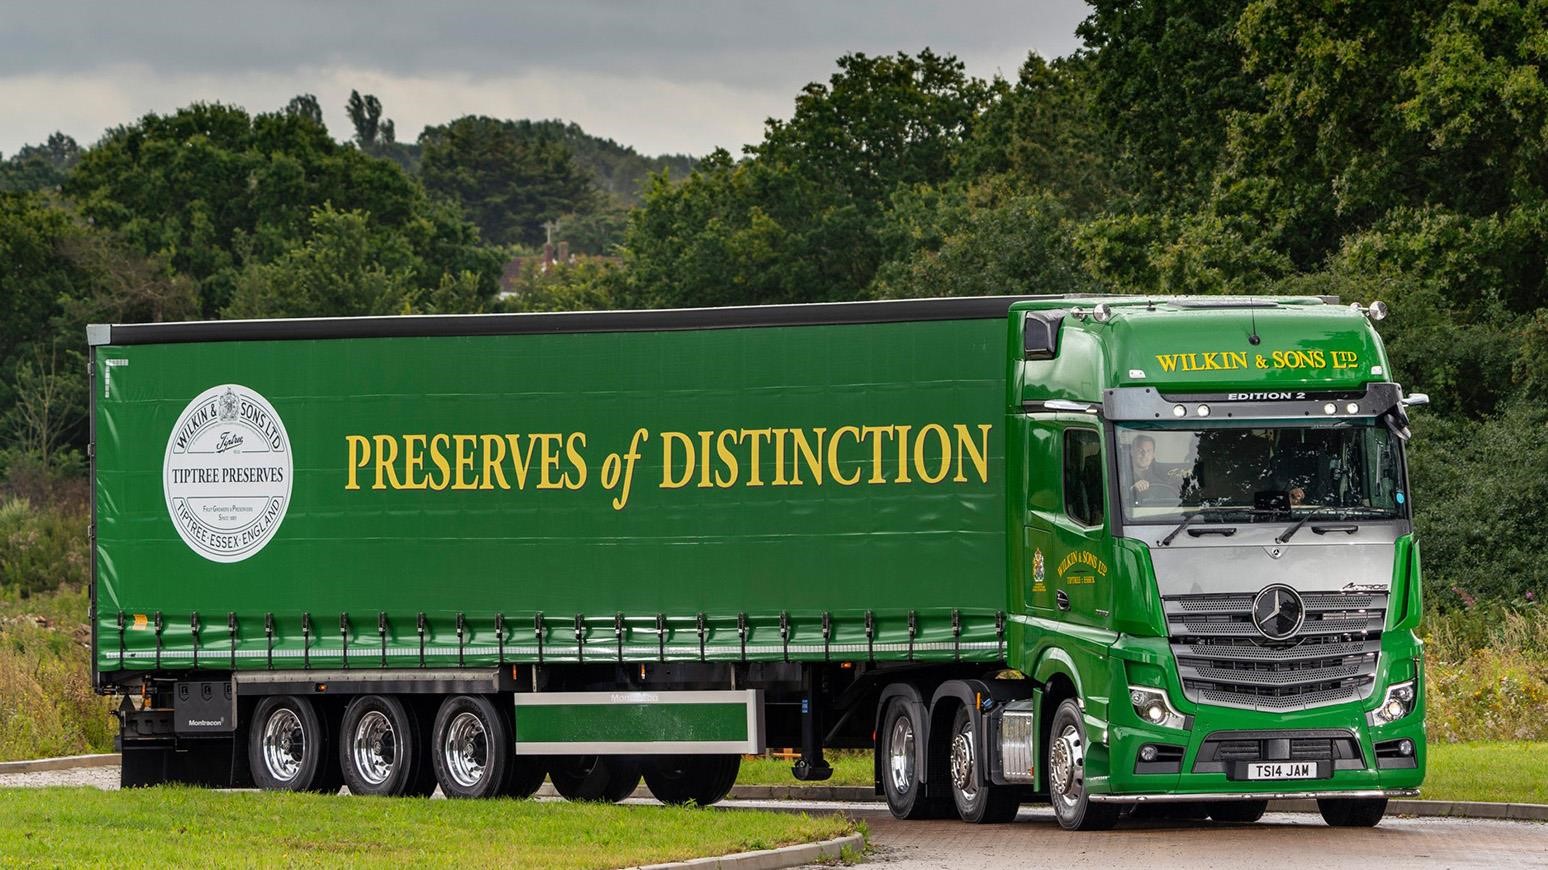 Tiptree Jam Producer Now Running Exclusive Edition 1 & Edition 2 Mercedes-Benz Actros